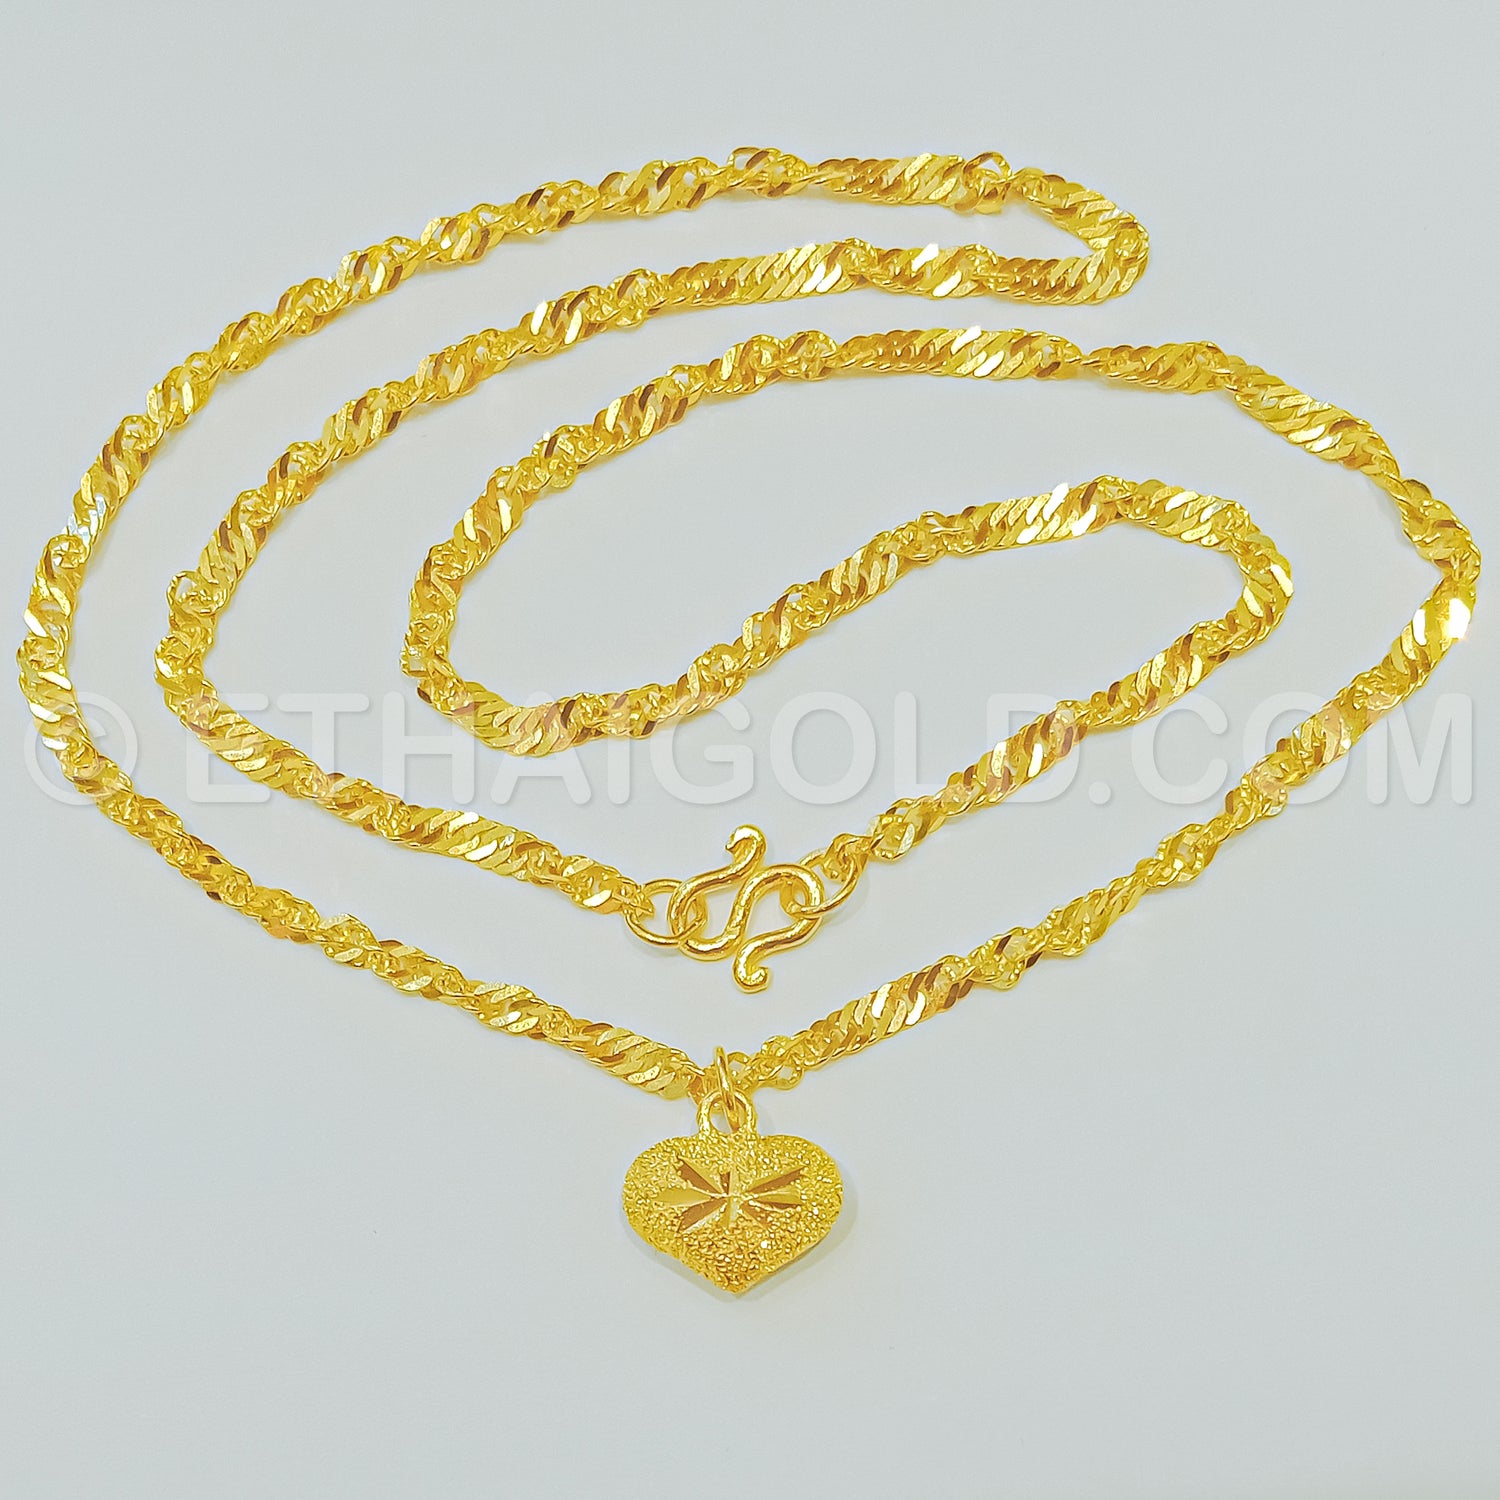 1/4 Baht Gold Necklaces